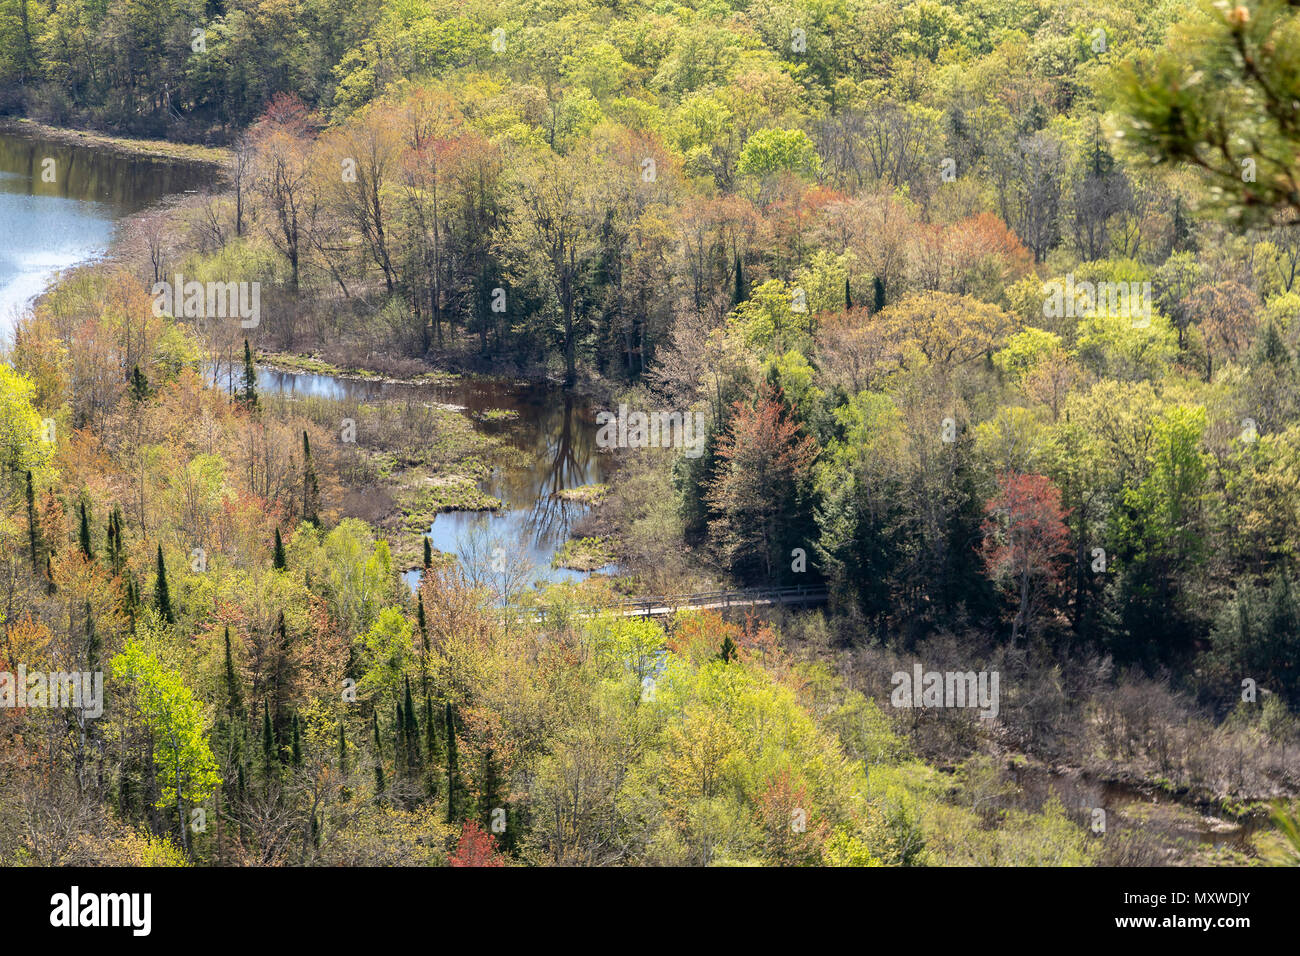 Ontonagon, Michigan - The Big Carp River, as it flows out of Lake of the Cluds, in Porcupine Mountains Wilderness State Park. A foot bridge carries th Stock Photo